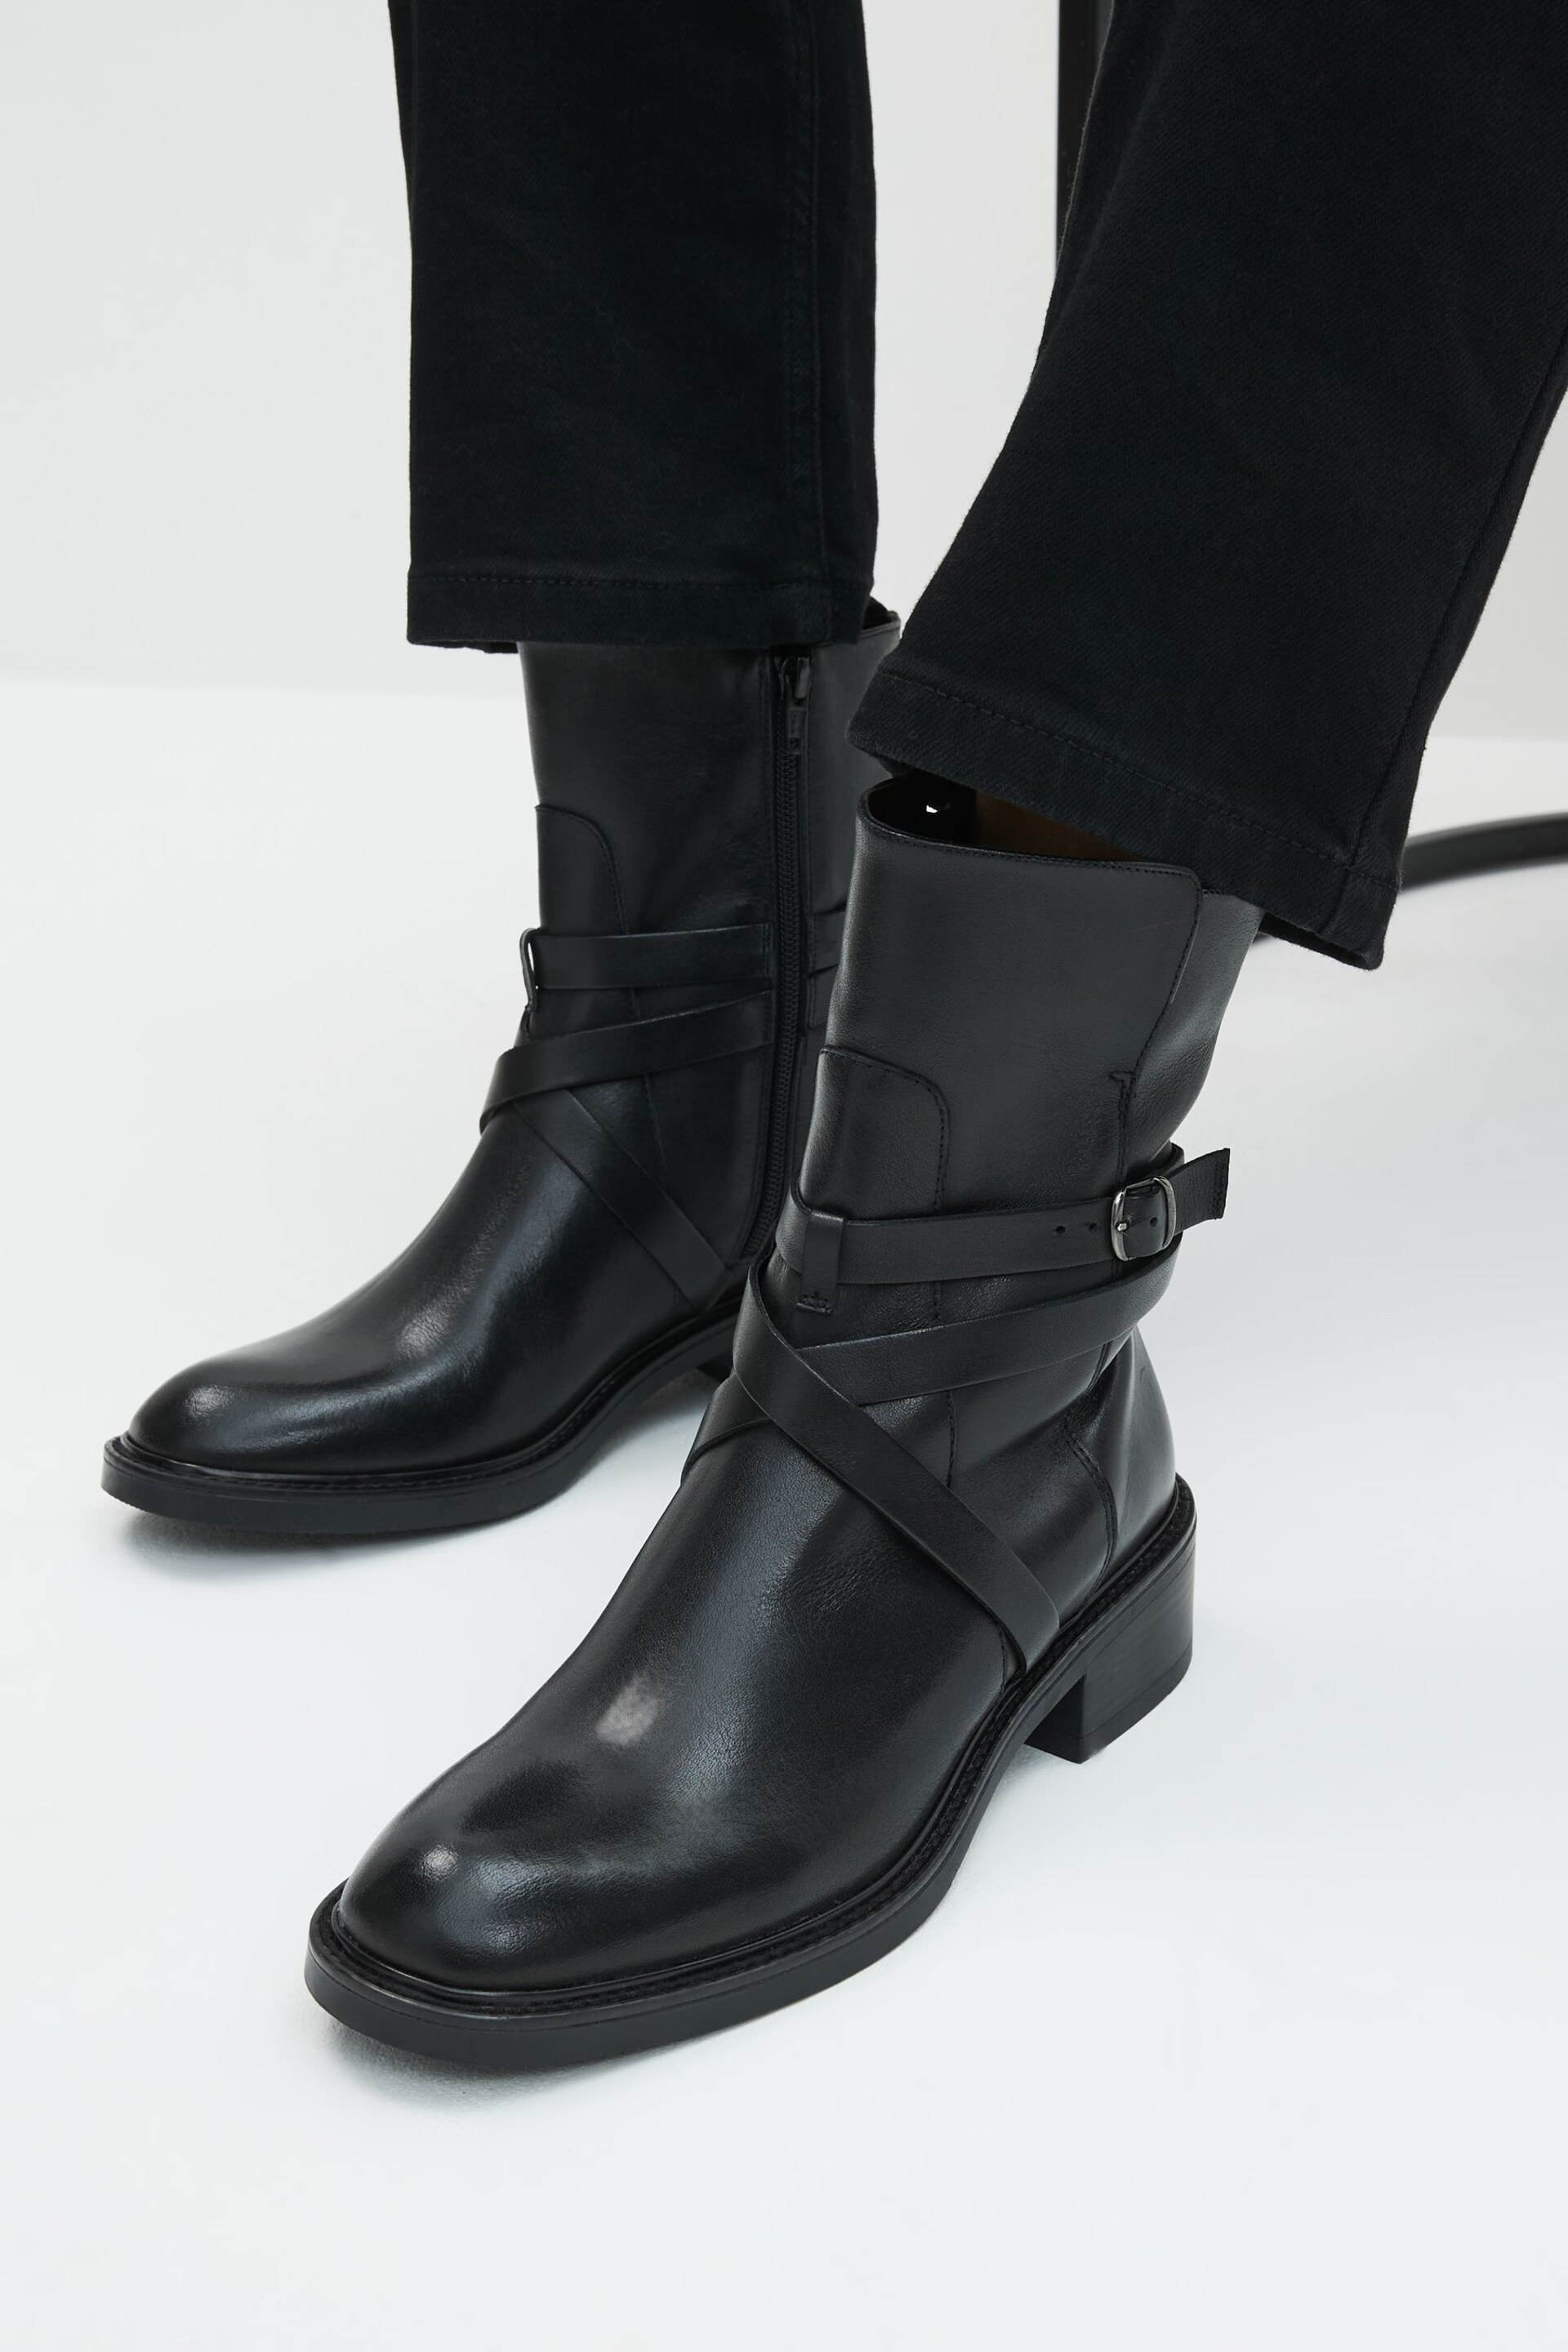 Black Signature Leather Strap Detail Ankle Boots - Image 2 of 10